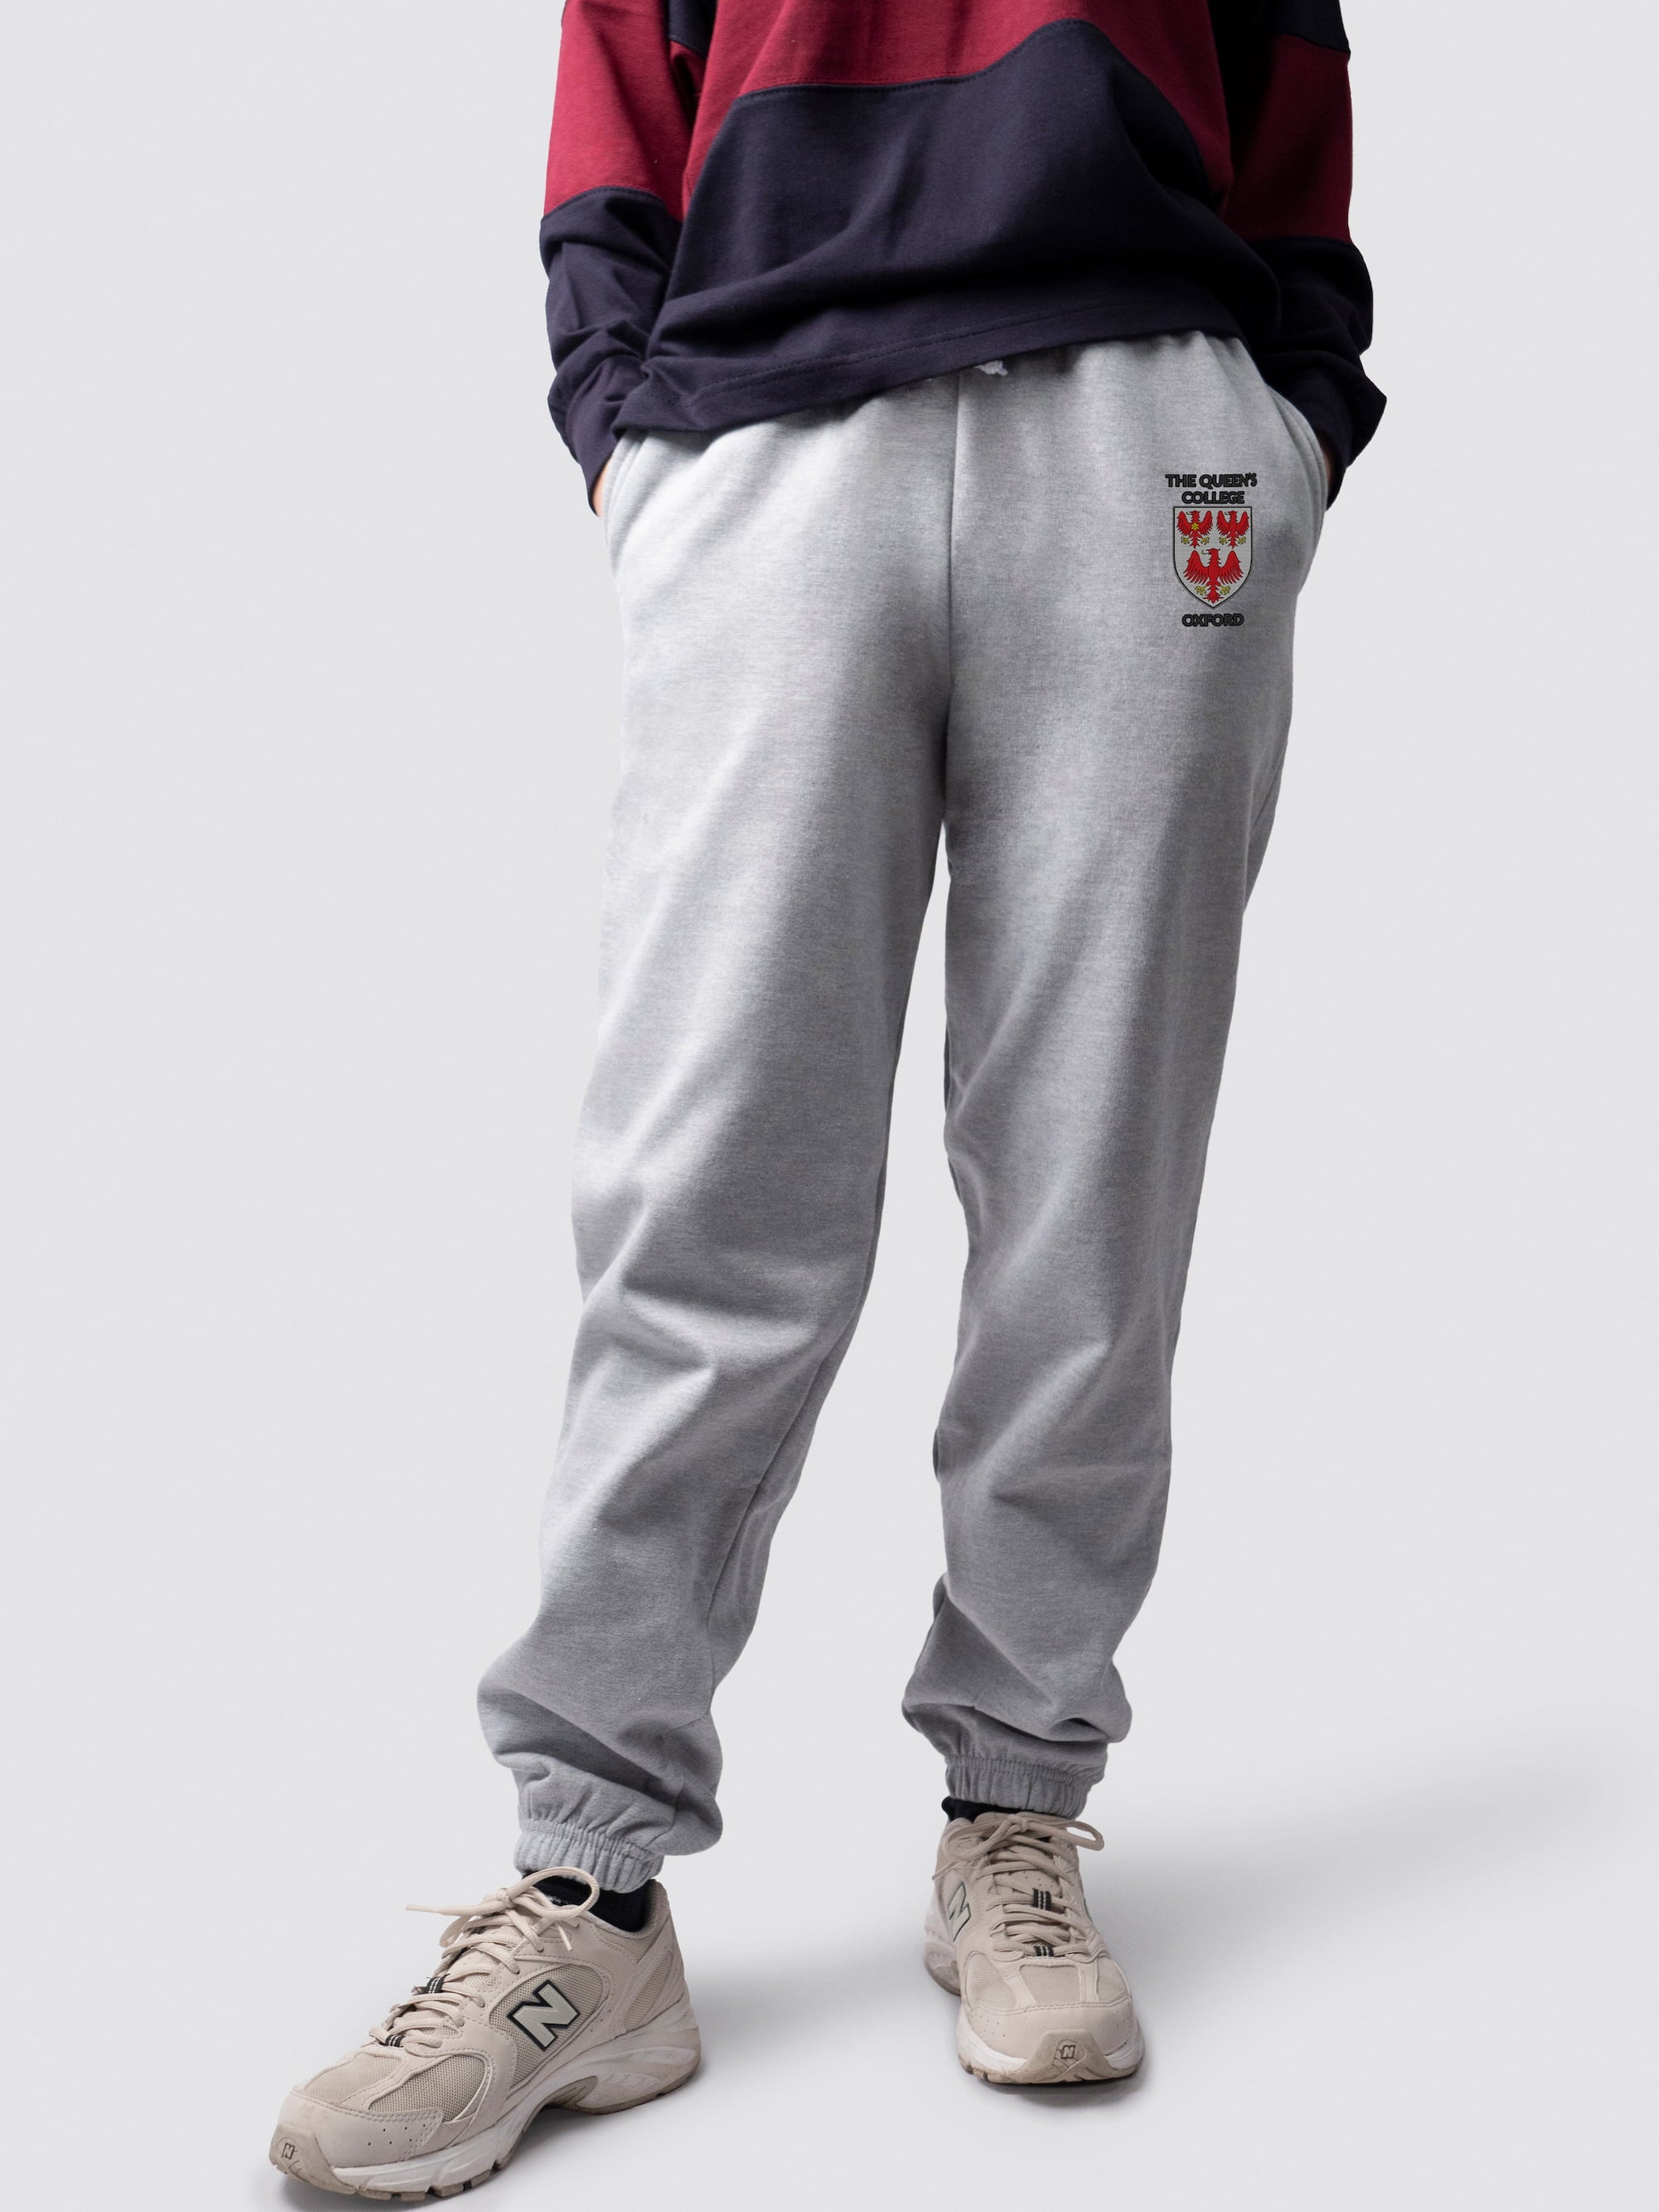 undergraduate cuffed sweatpants, made from soft cotton fabric, with The Queen's logo